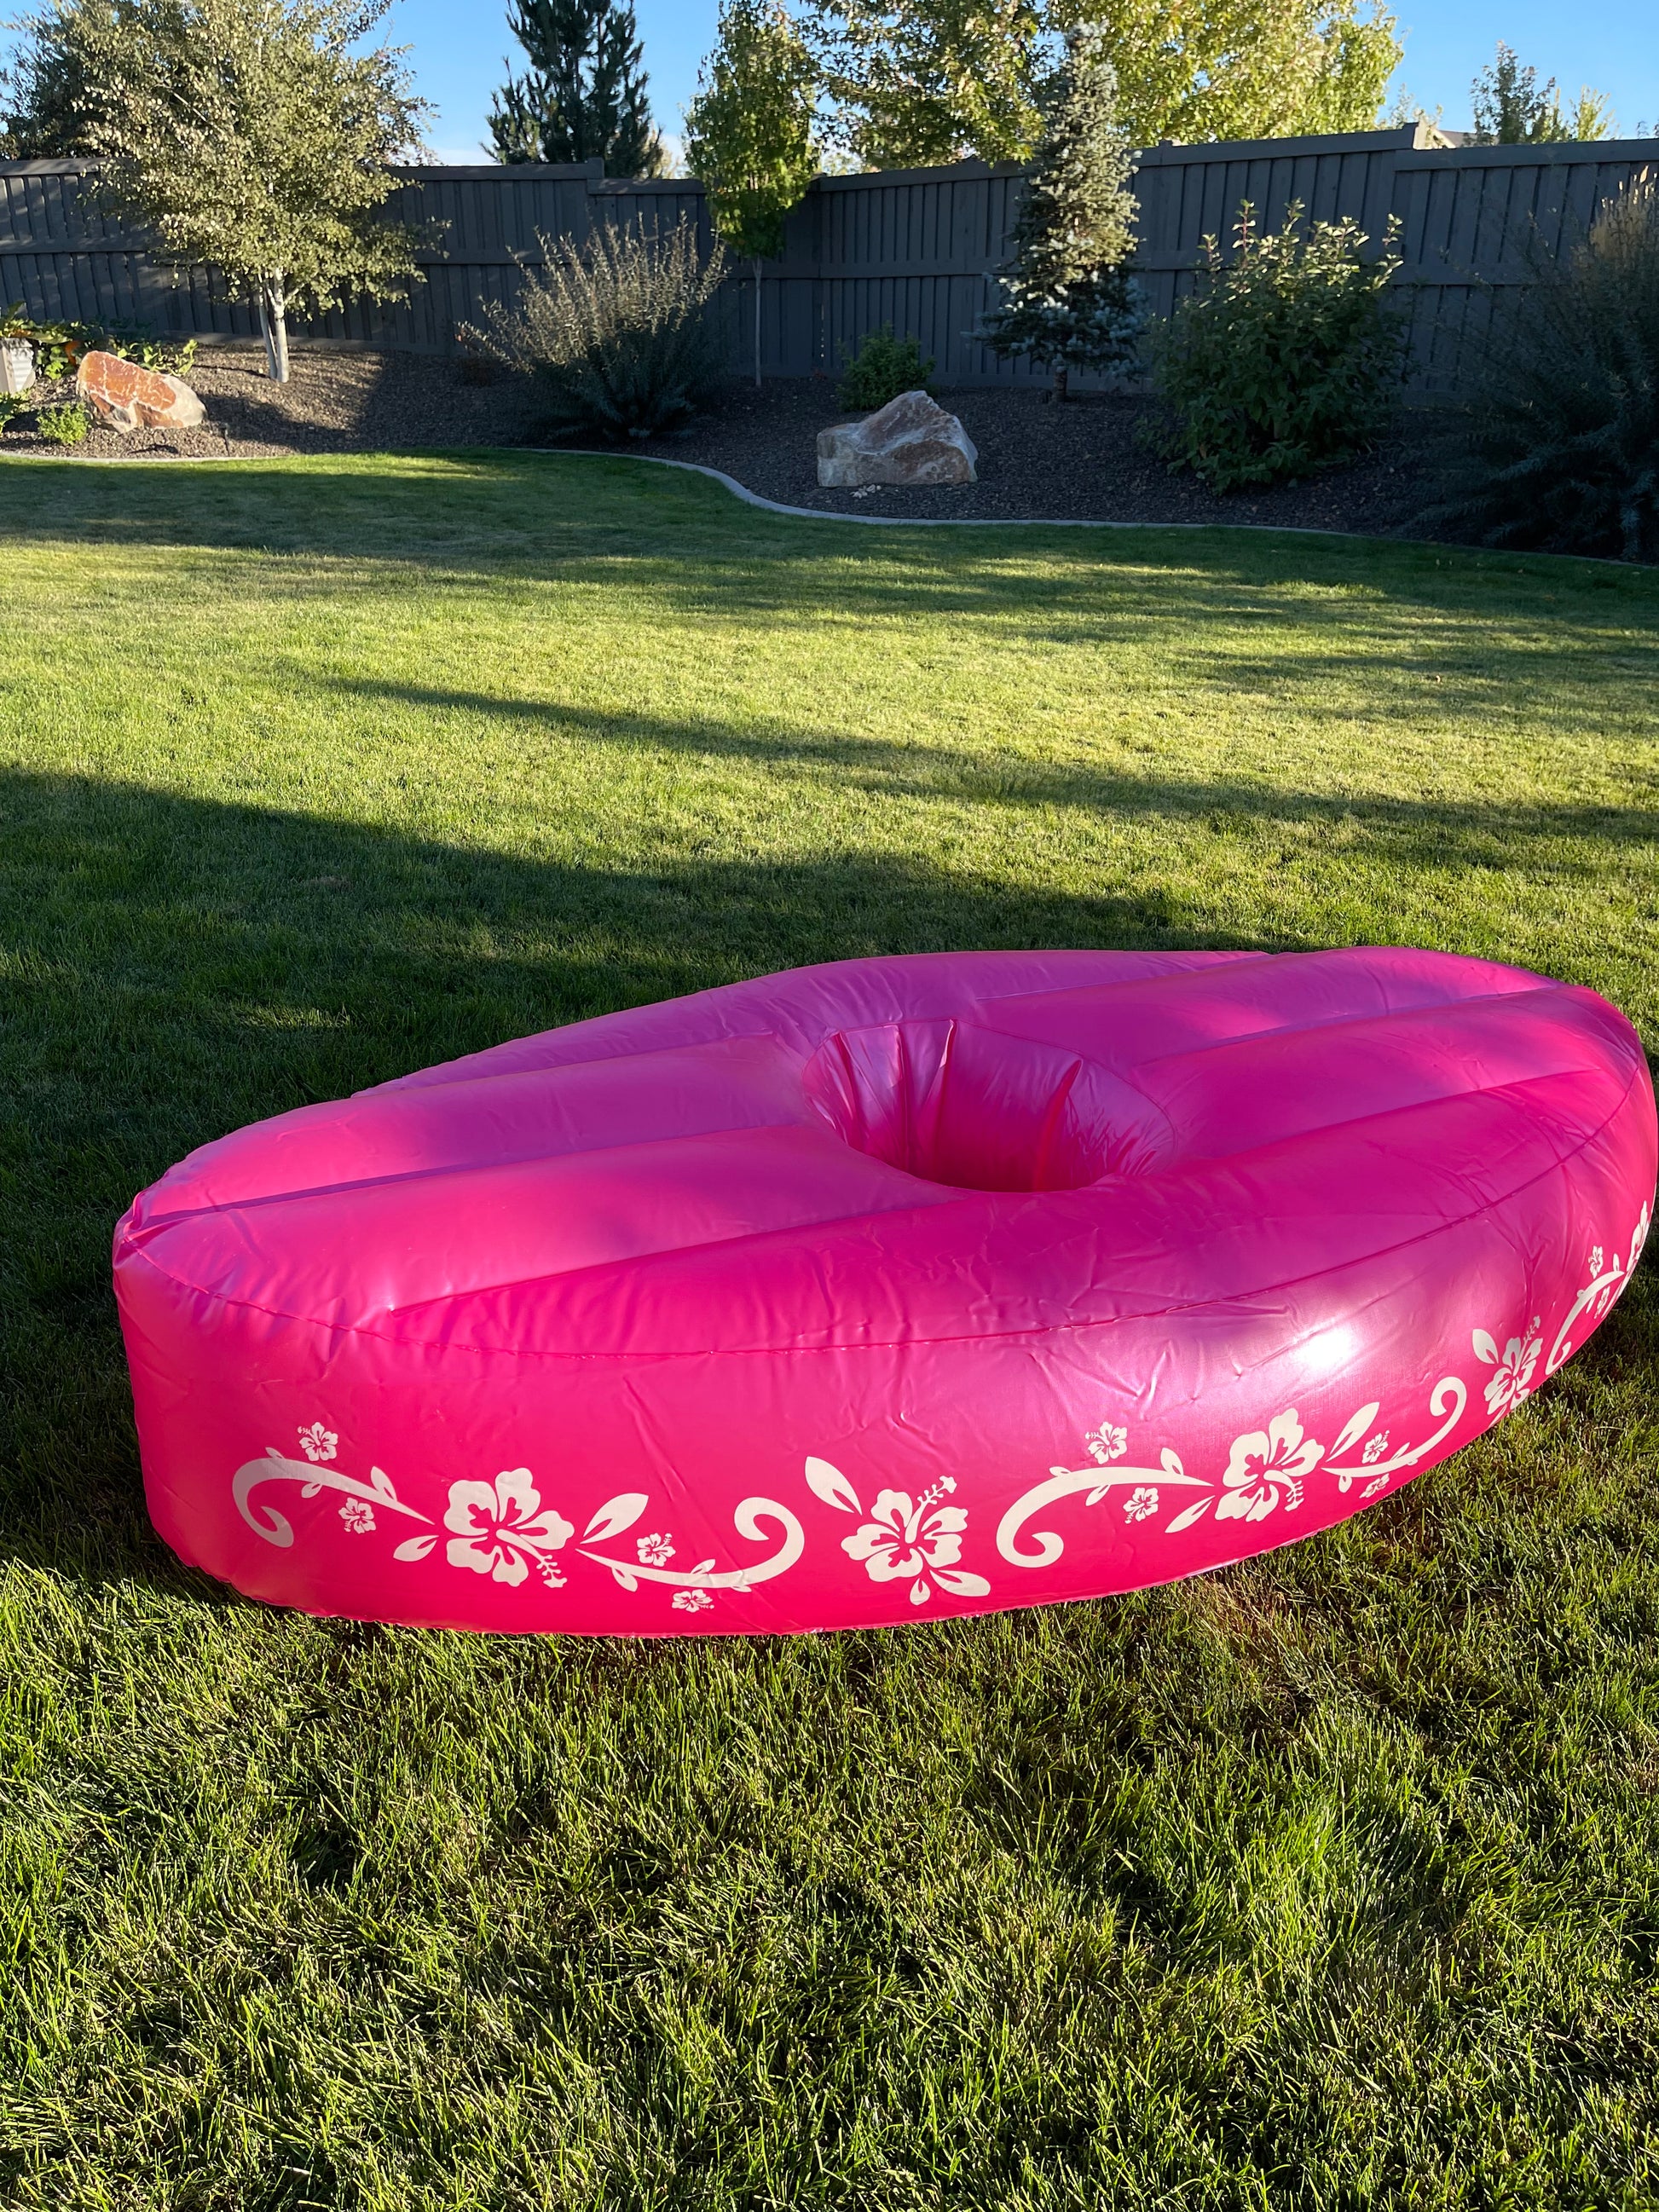 Inflatable Bbl mattress (oval) with more support